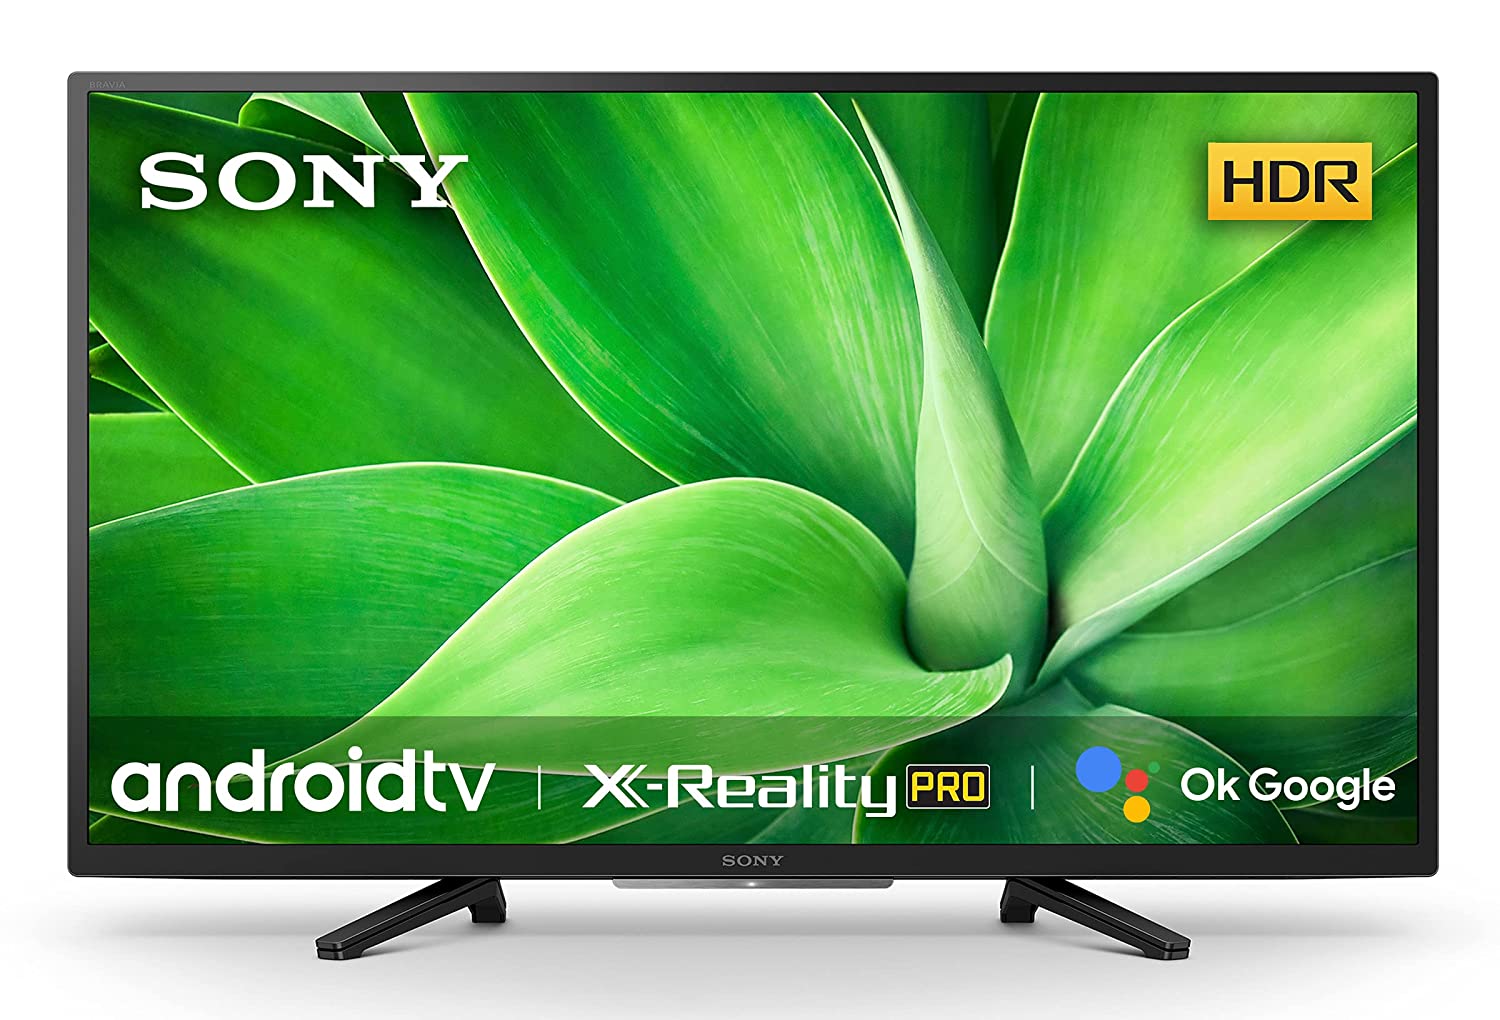 Sony Bravia 32 inches Android LED TV